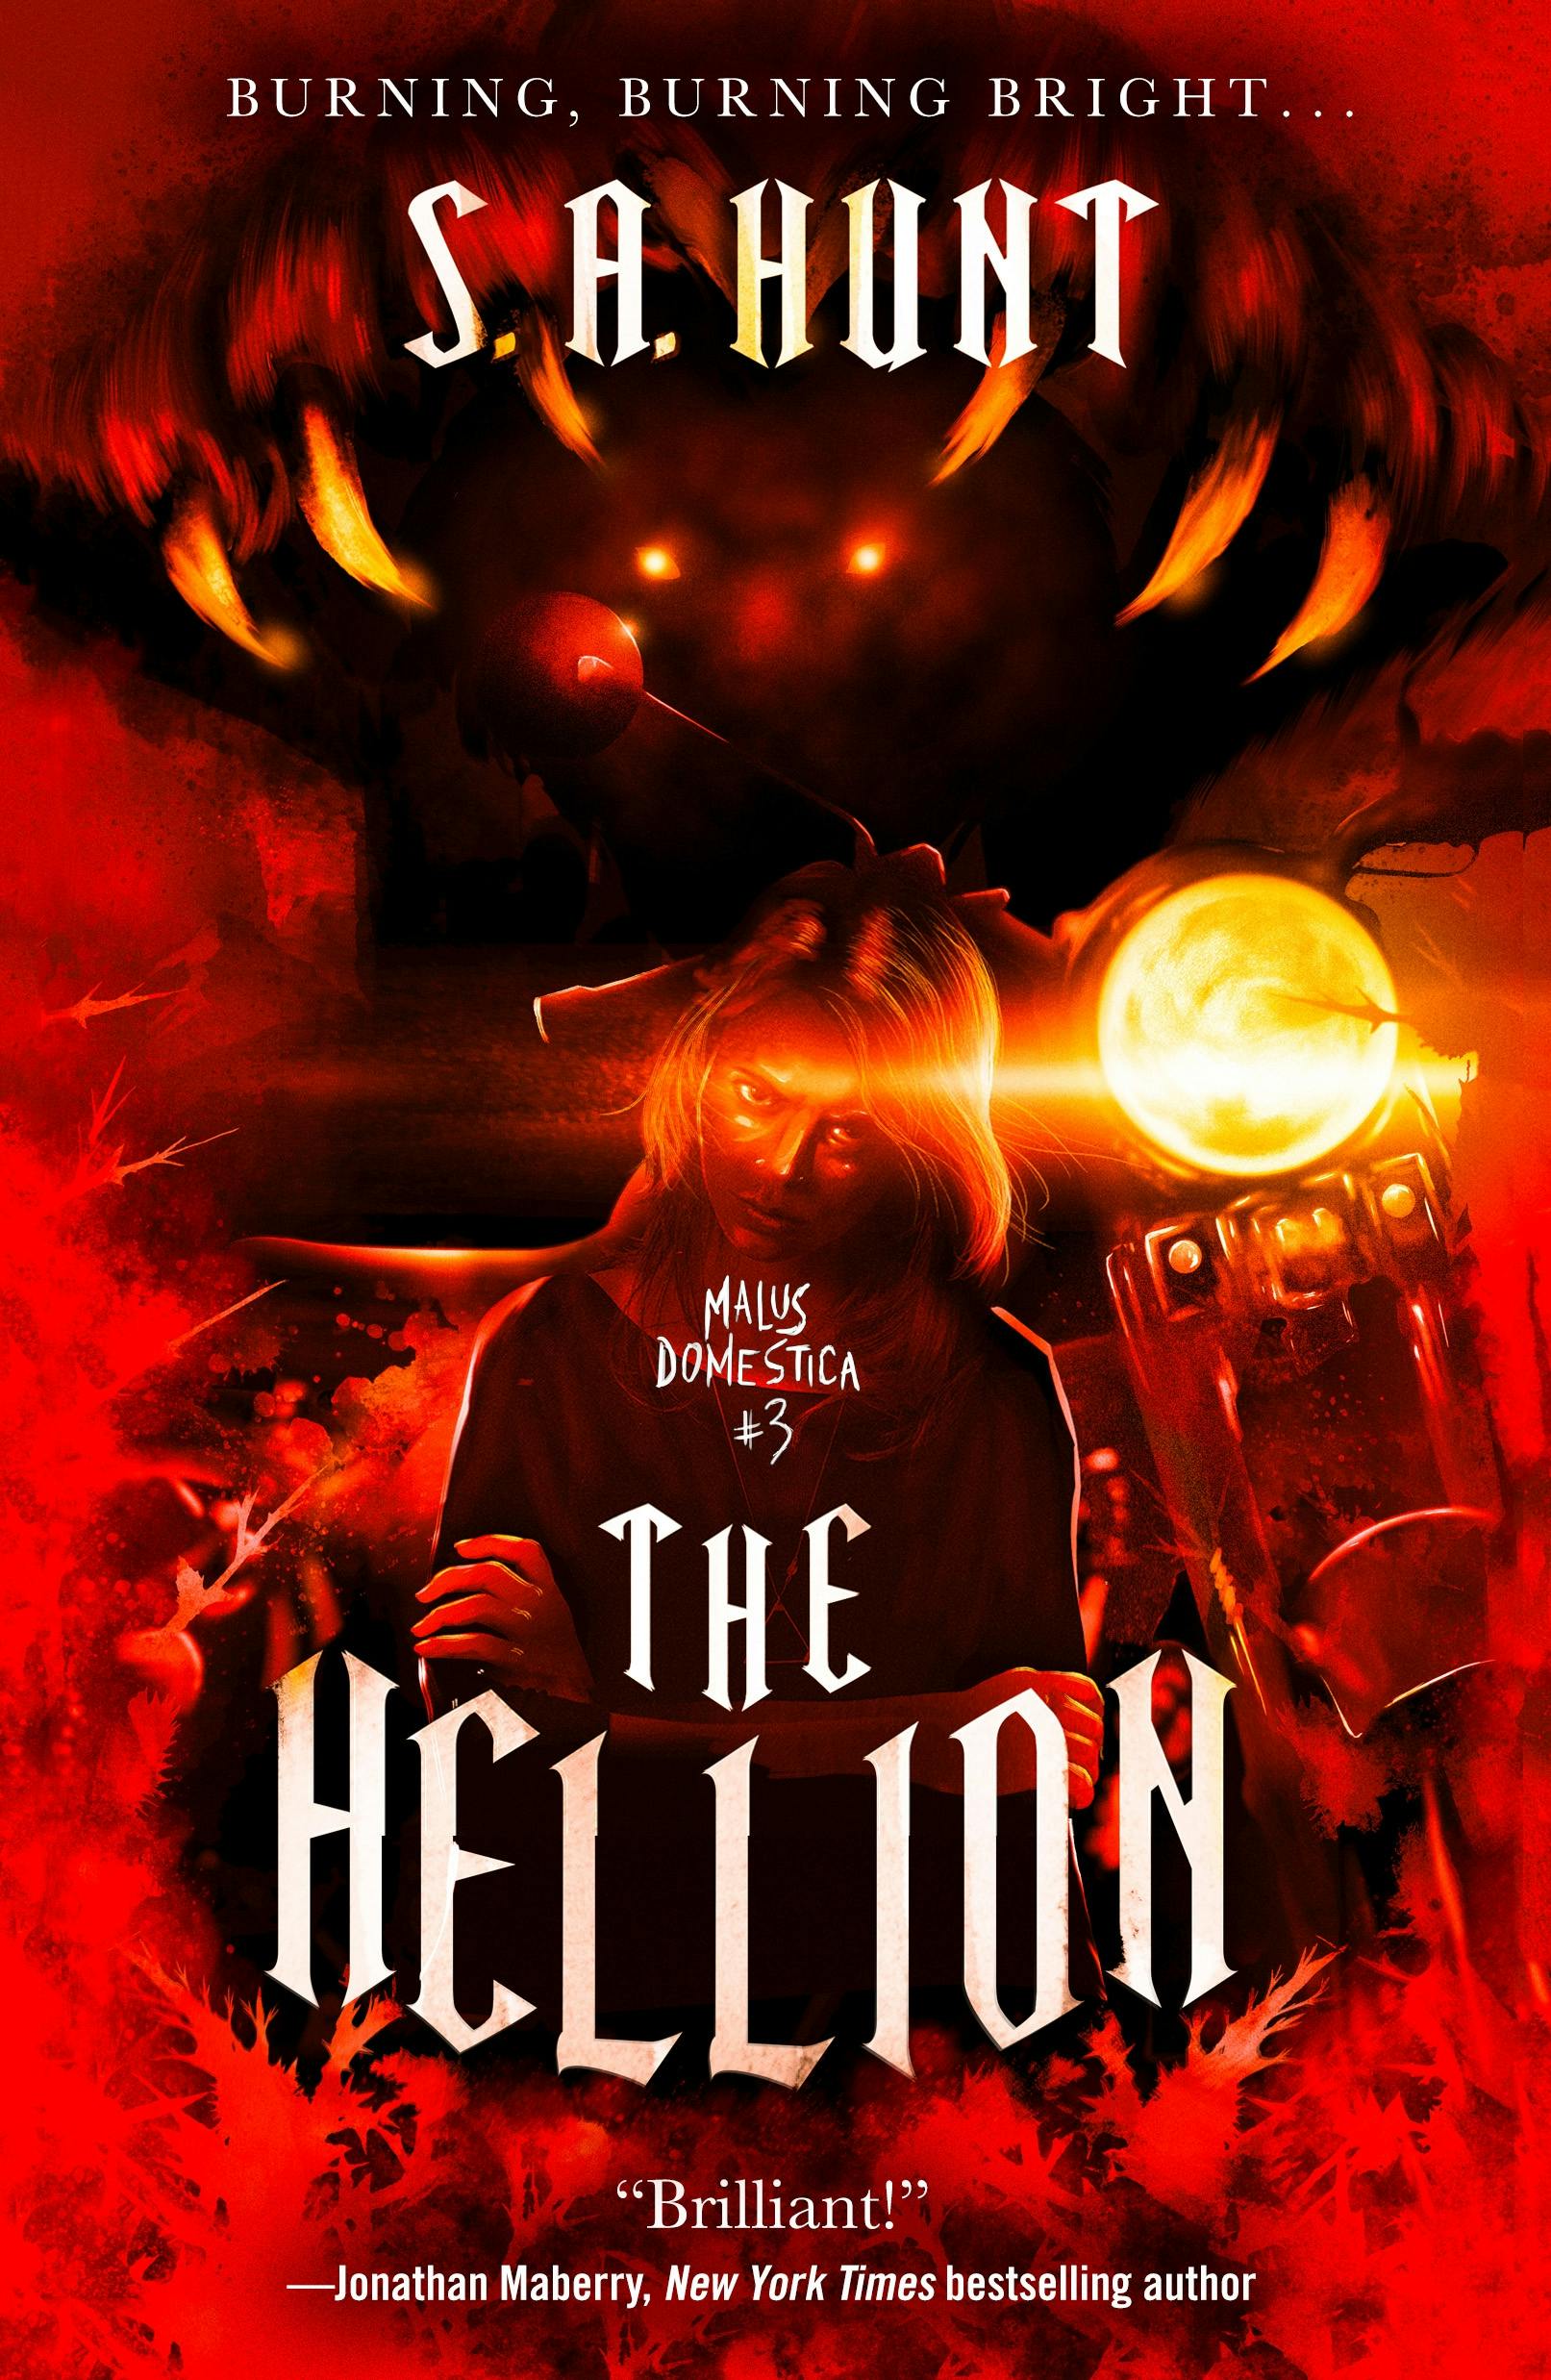 Cover for the book titled as: The Hellion